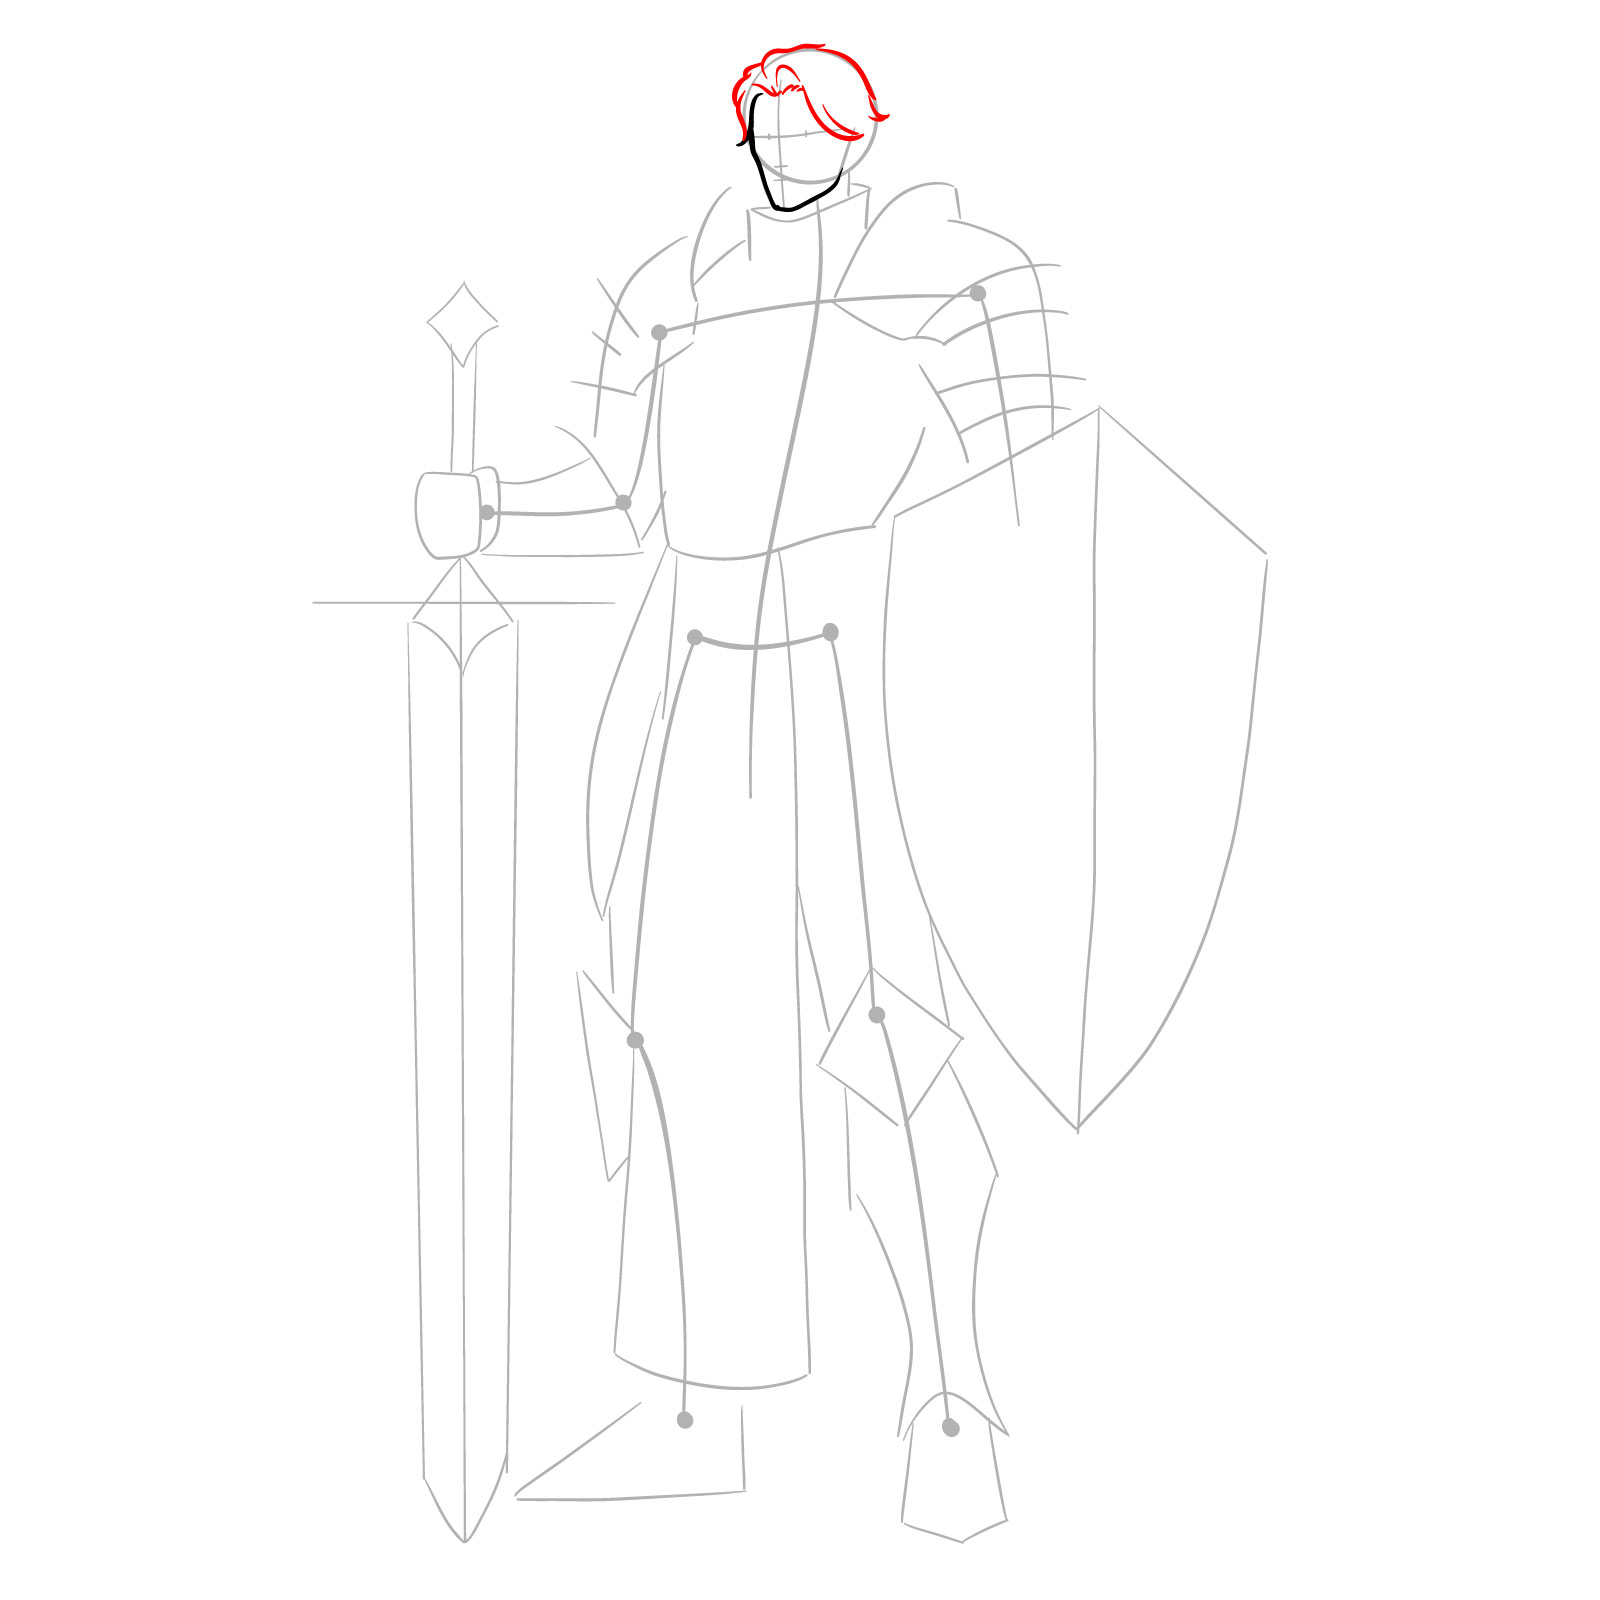 Sketching the hair outline on the paladin figure - step 05